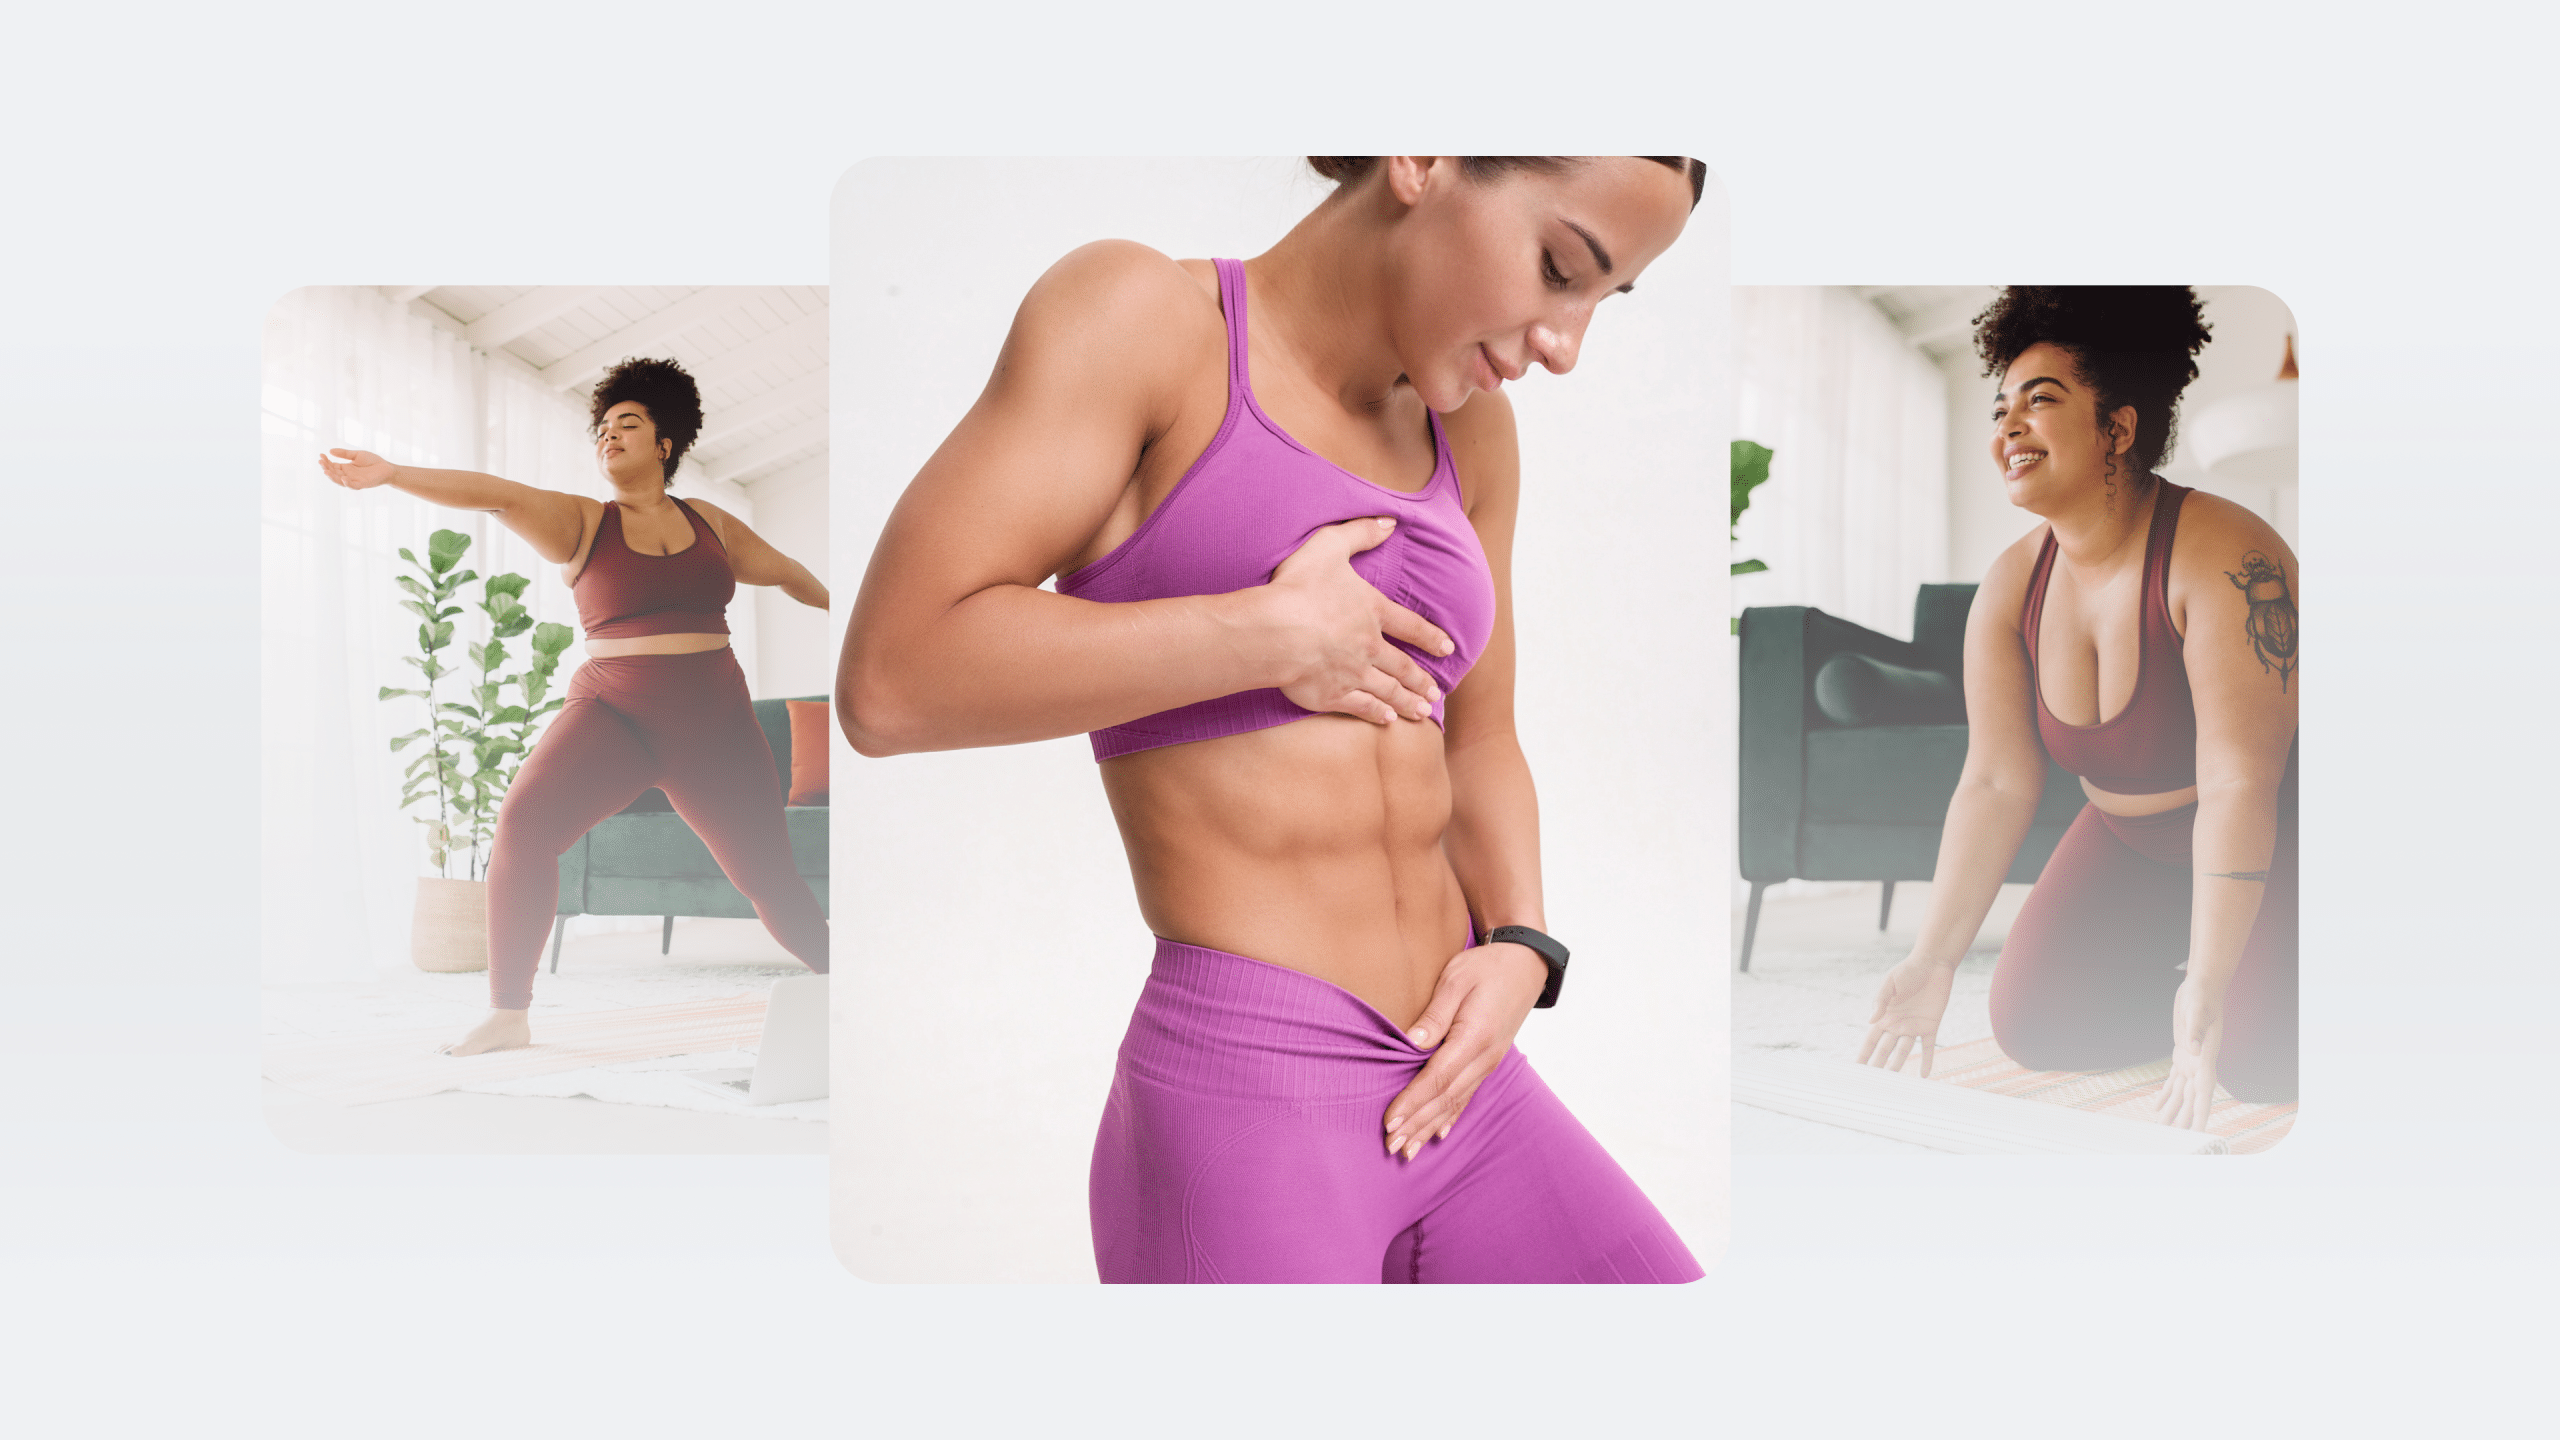 Gym Girl Inspiration: How To Jumpstart Your Transformation